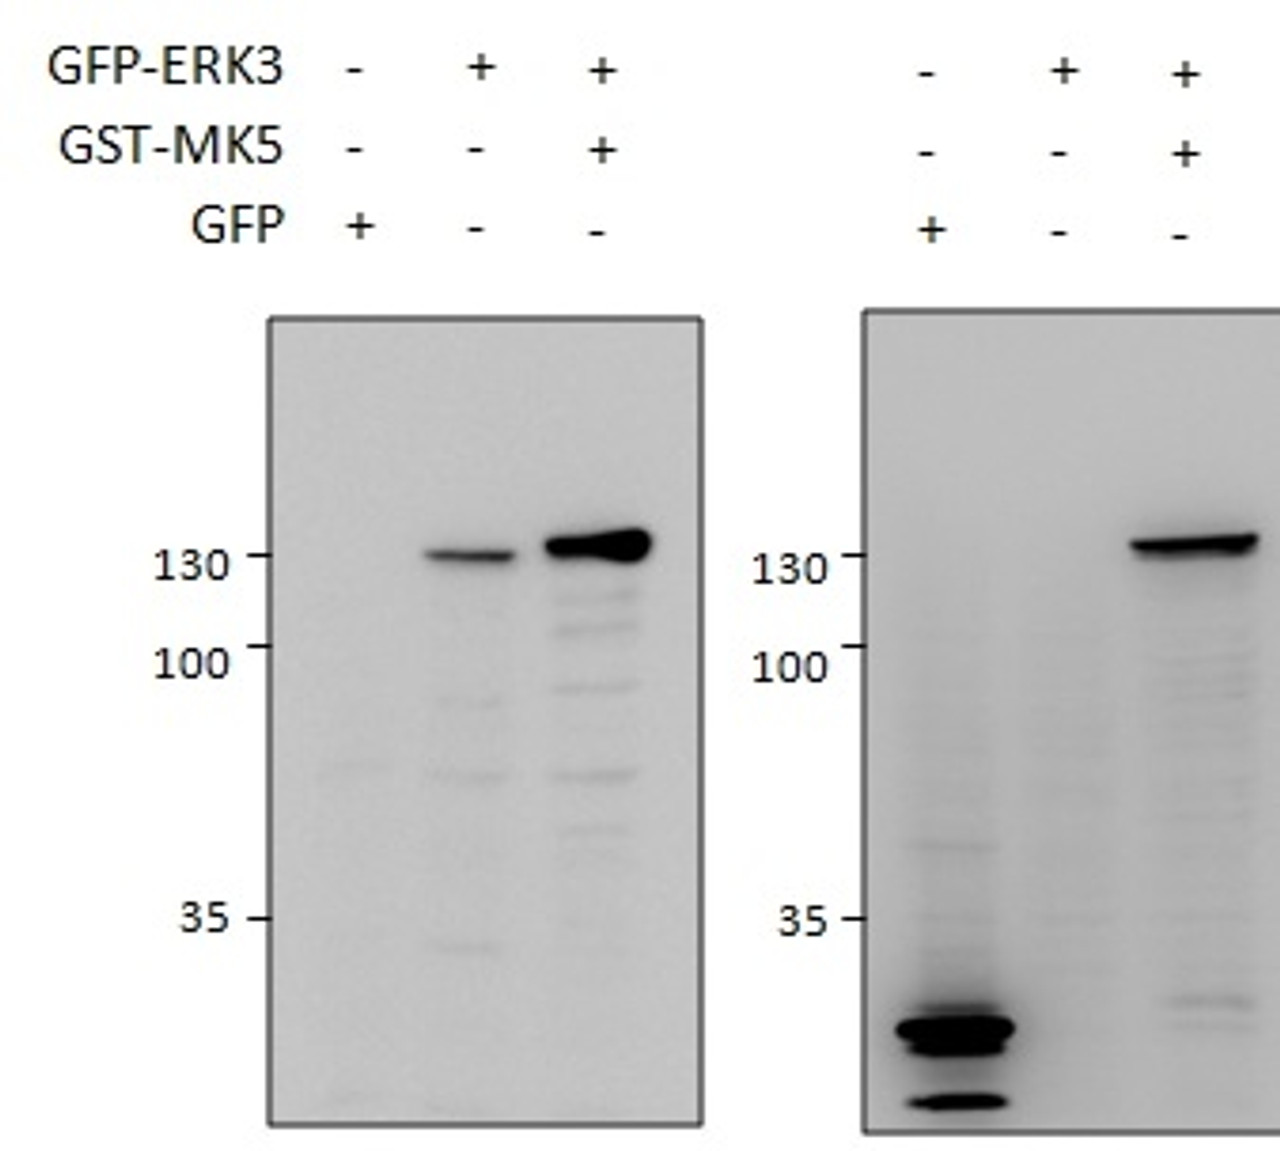 43-311 and EB11928 (1.5ug) immunoprecipitations from lysates of MK5/ERK3 double knockout MEFs, with (third and fifth lanes) and without (fourth and sixth lanes) rescued MK5/ERK3 expression through retroviral transduction. The corresponding lysates (first